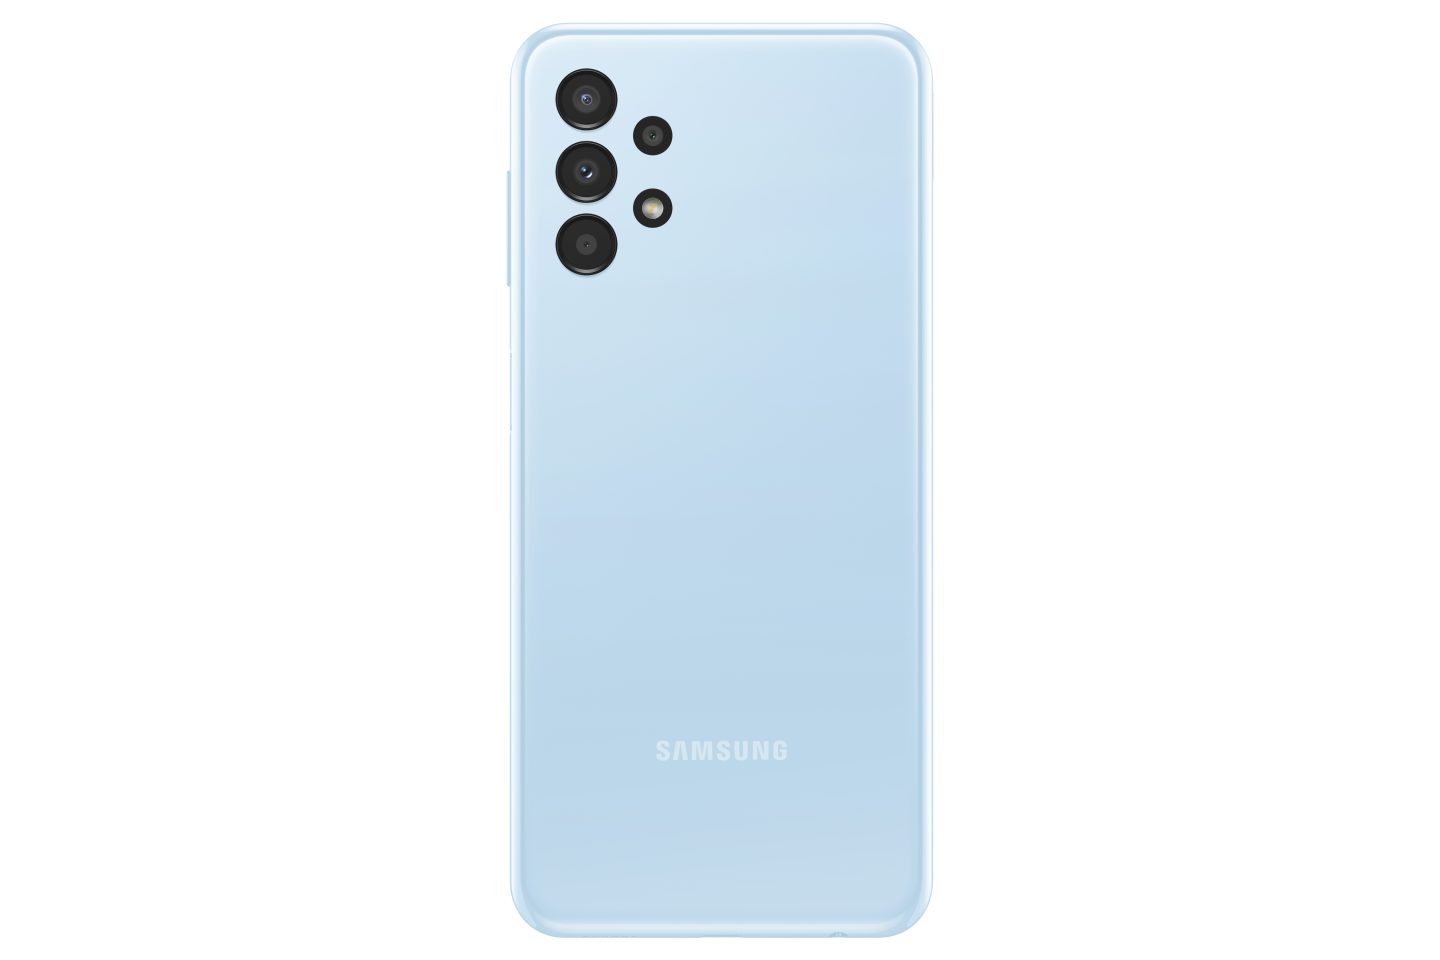 Samsung Galaxy A13 ( Blue ) 4G / LTE Smartphone with 6.6 Inch Display, Android 12, MicroSD Slot Up to 1TB, 5000 mAh Battery 